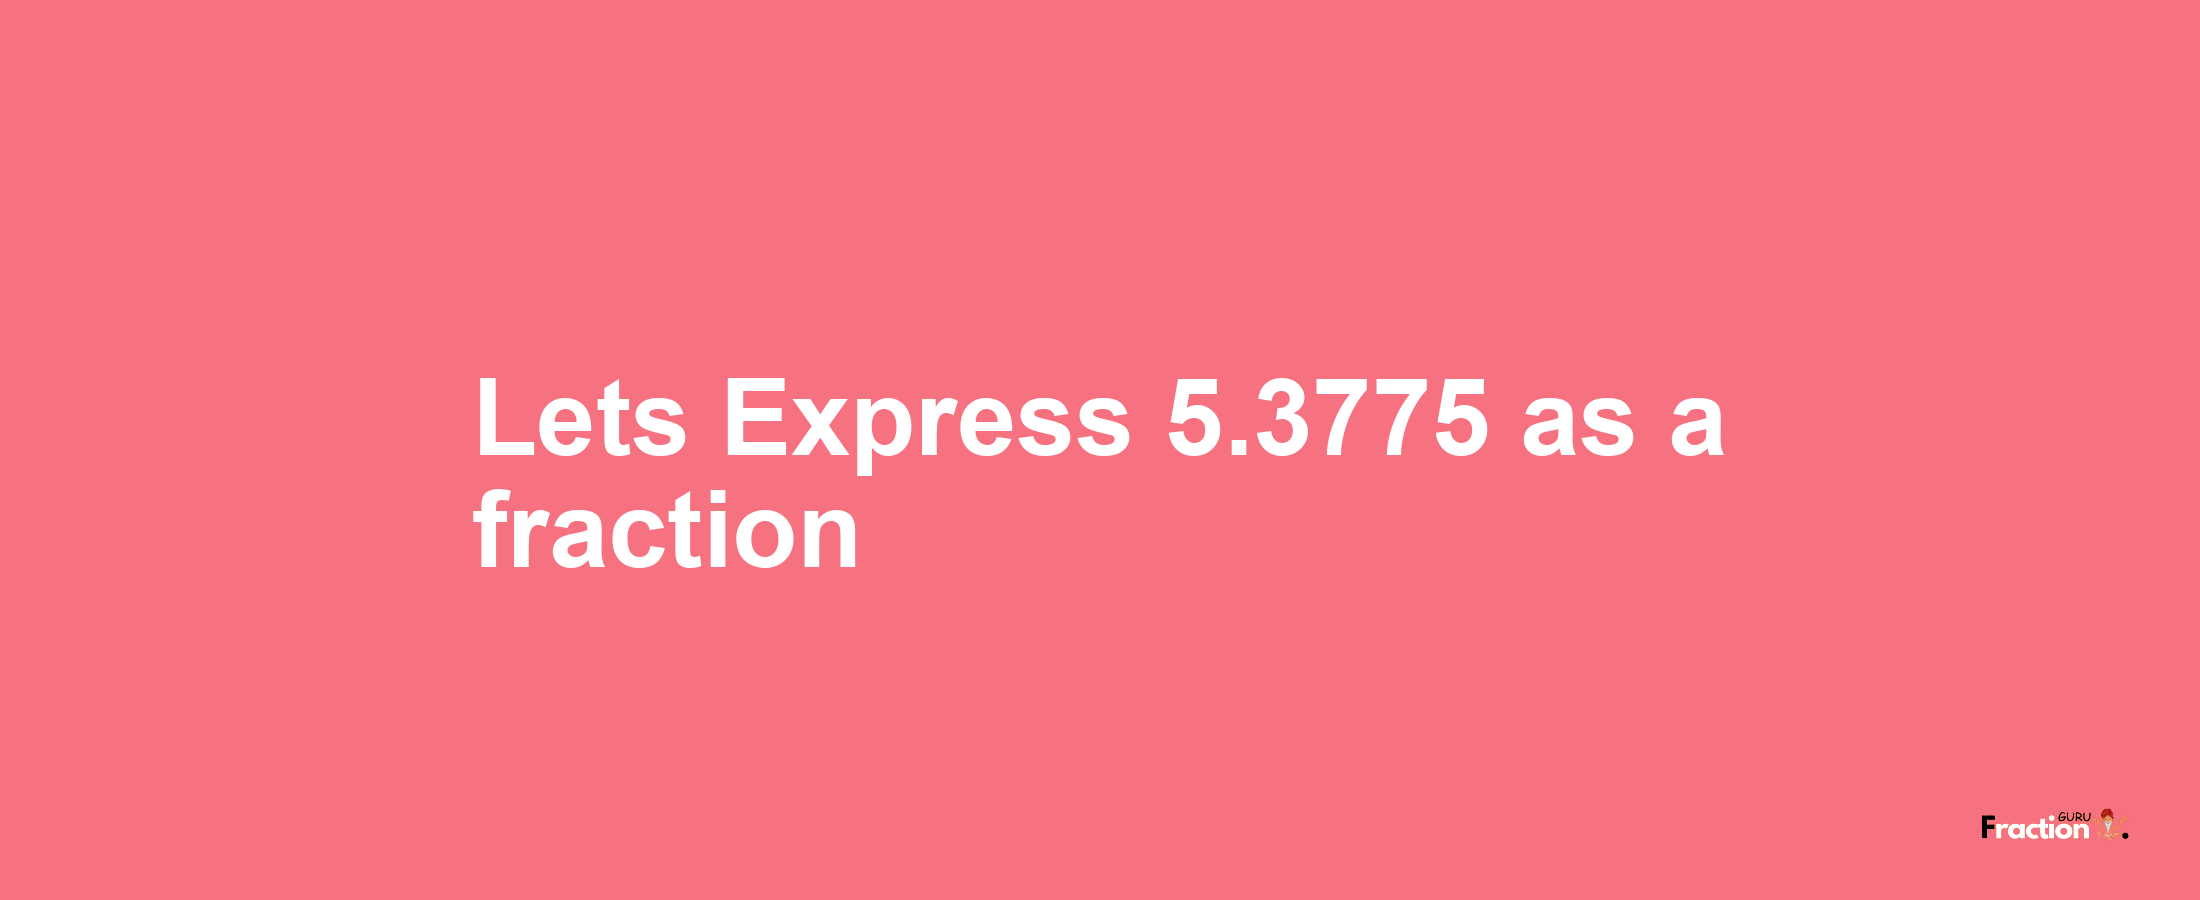 Lets Express 5.3775 as afraction